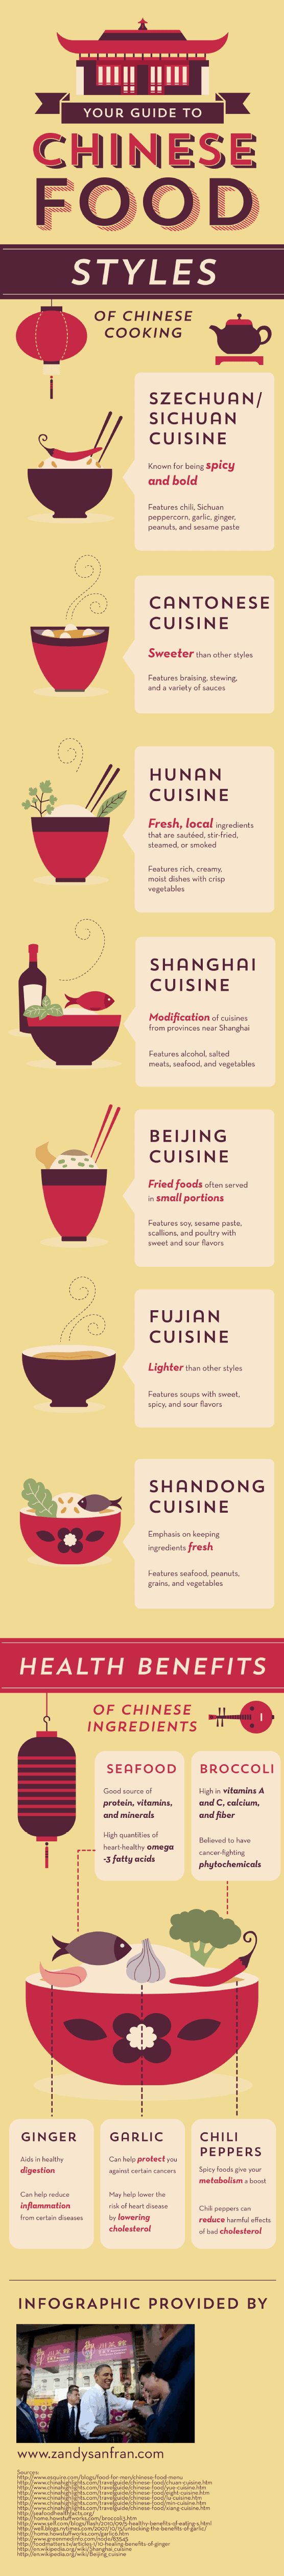 Your Guide to Chinese Food